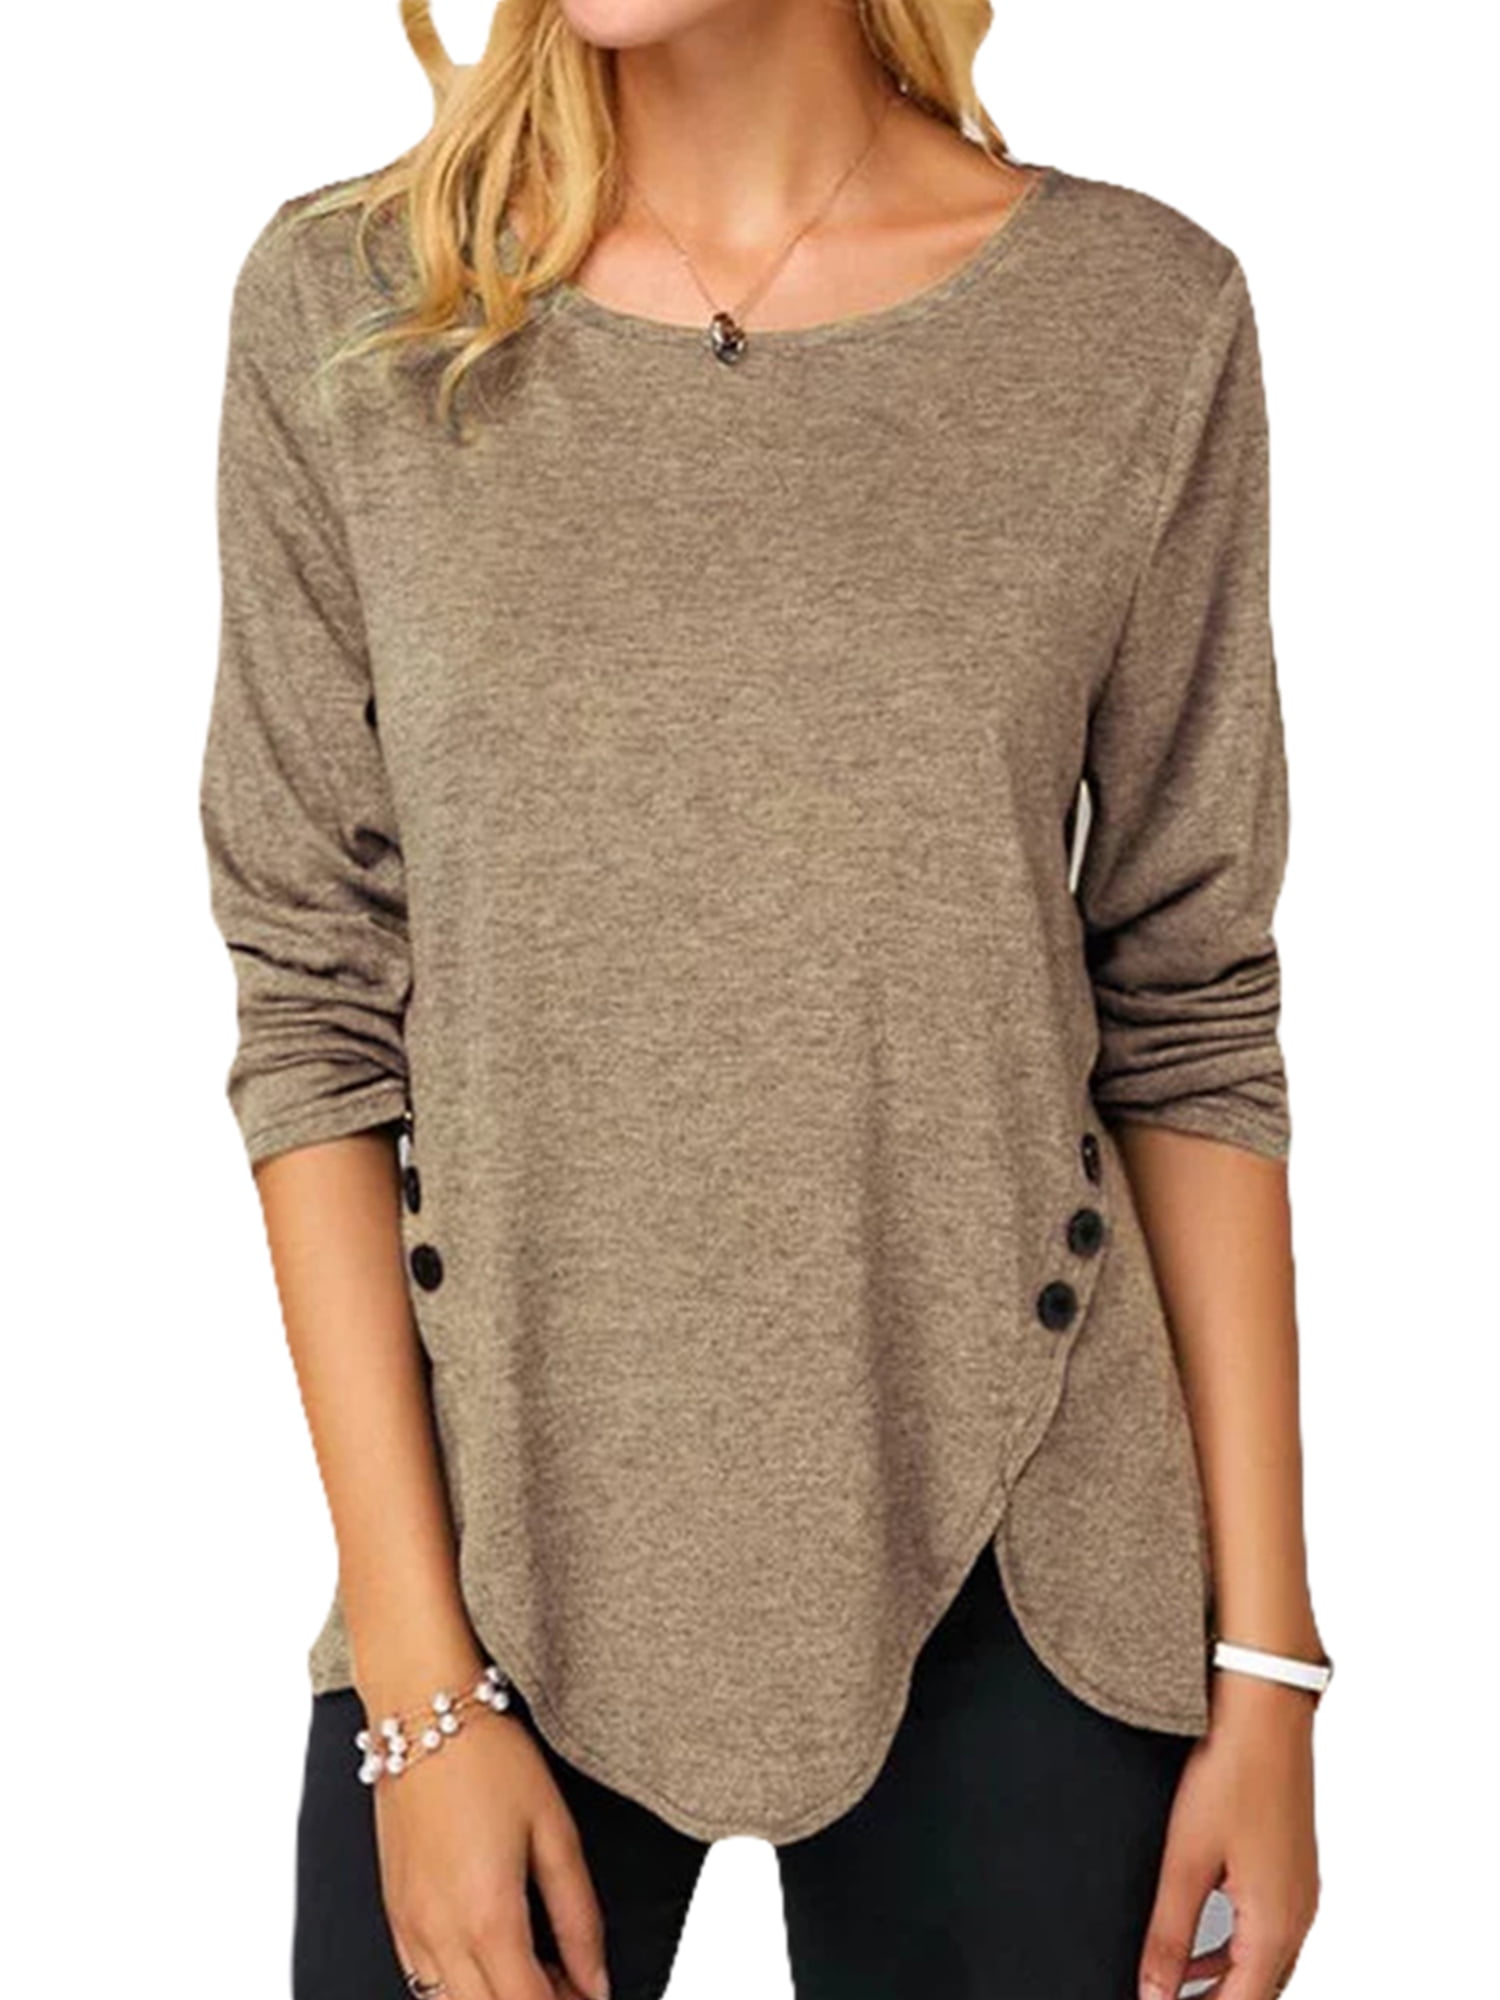 Kumono Casual Shoulder Round Neck Super Soft Long Sleeve Loose Sweater Top T-Shirt 